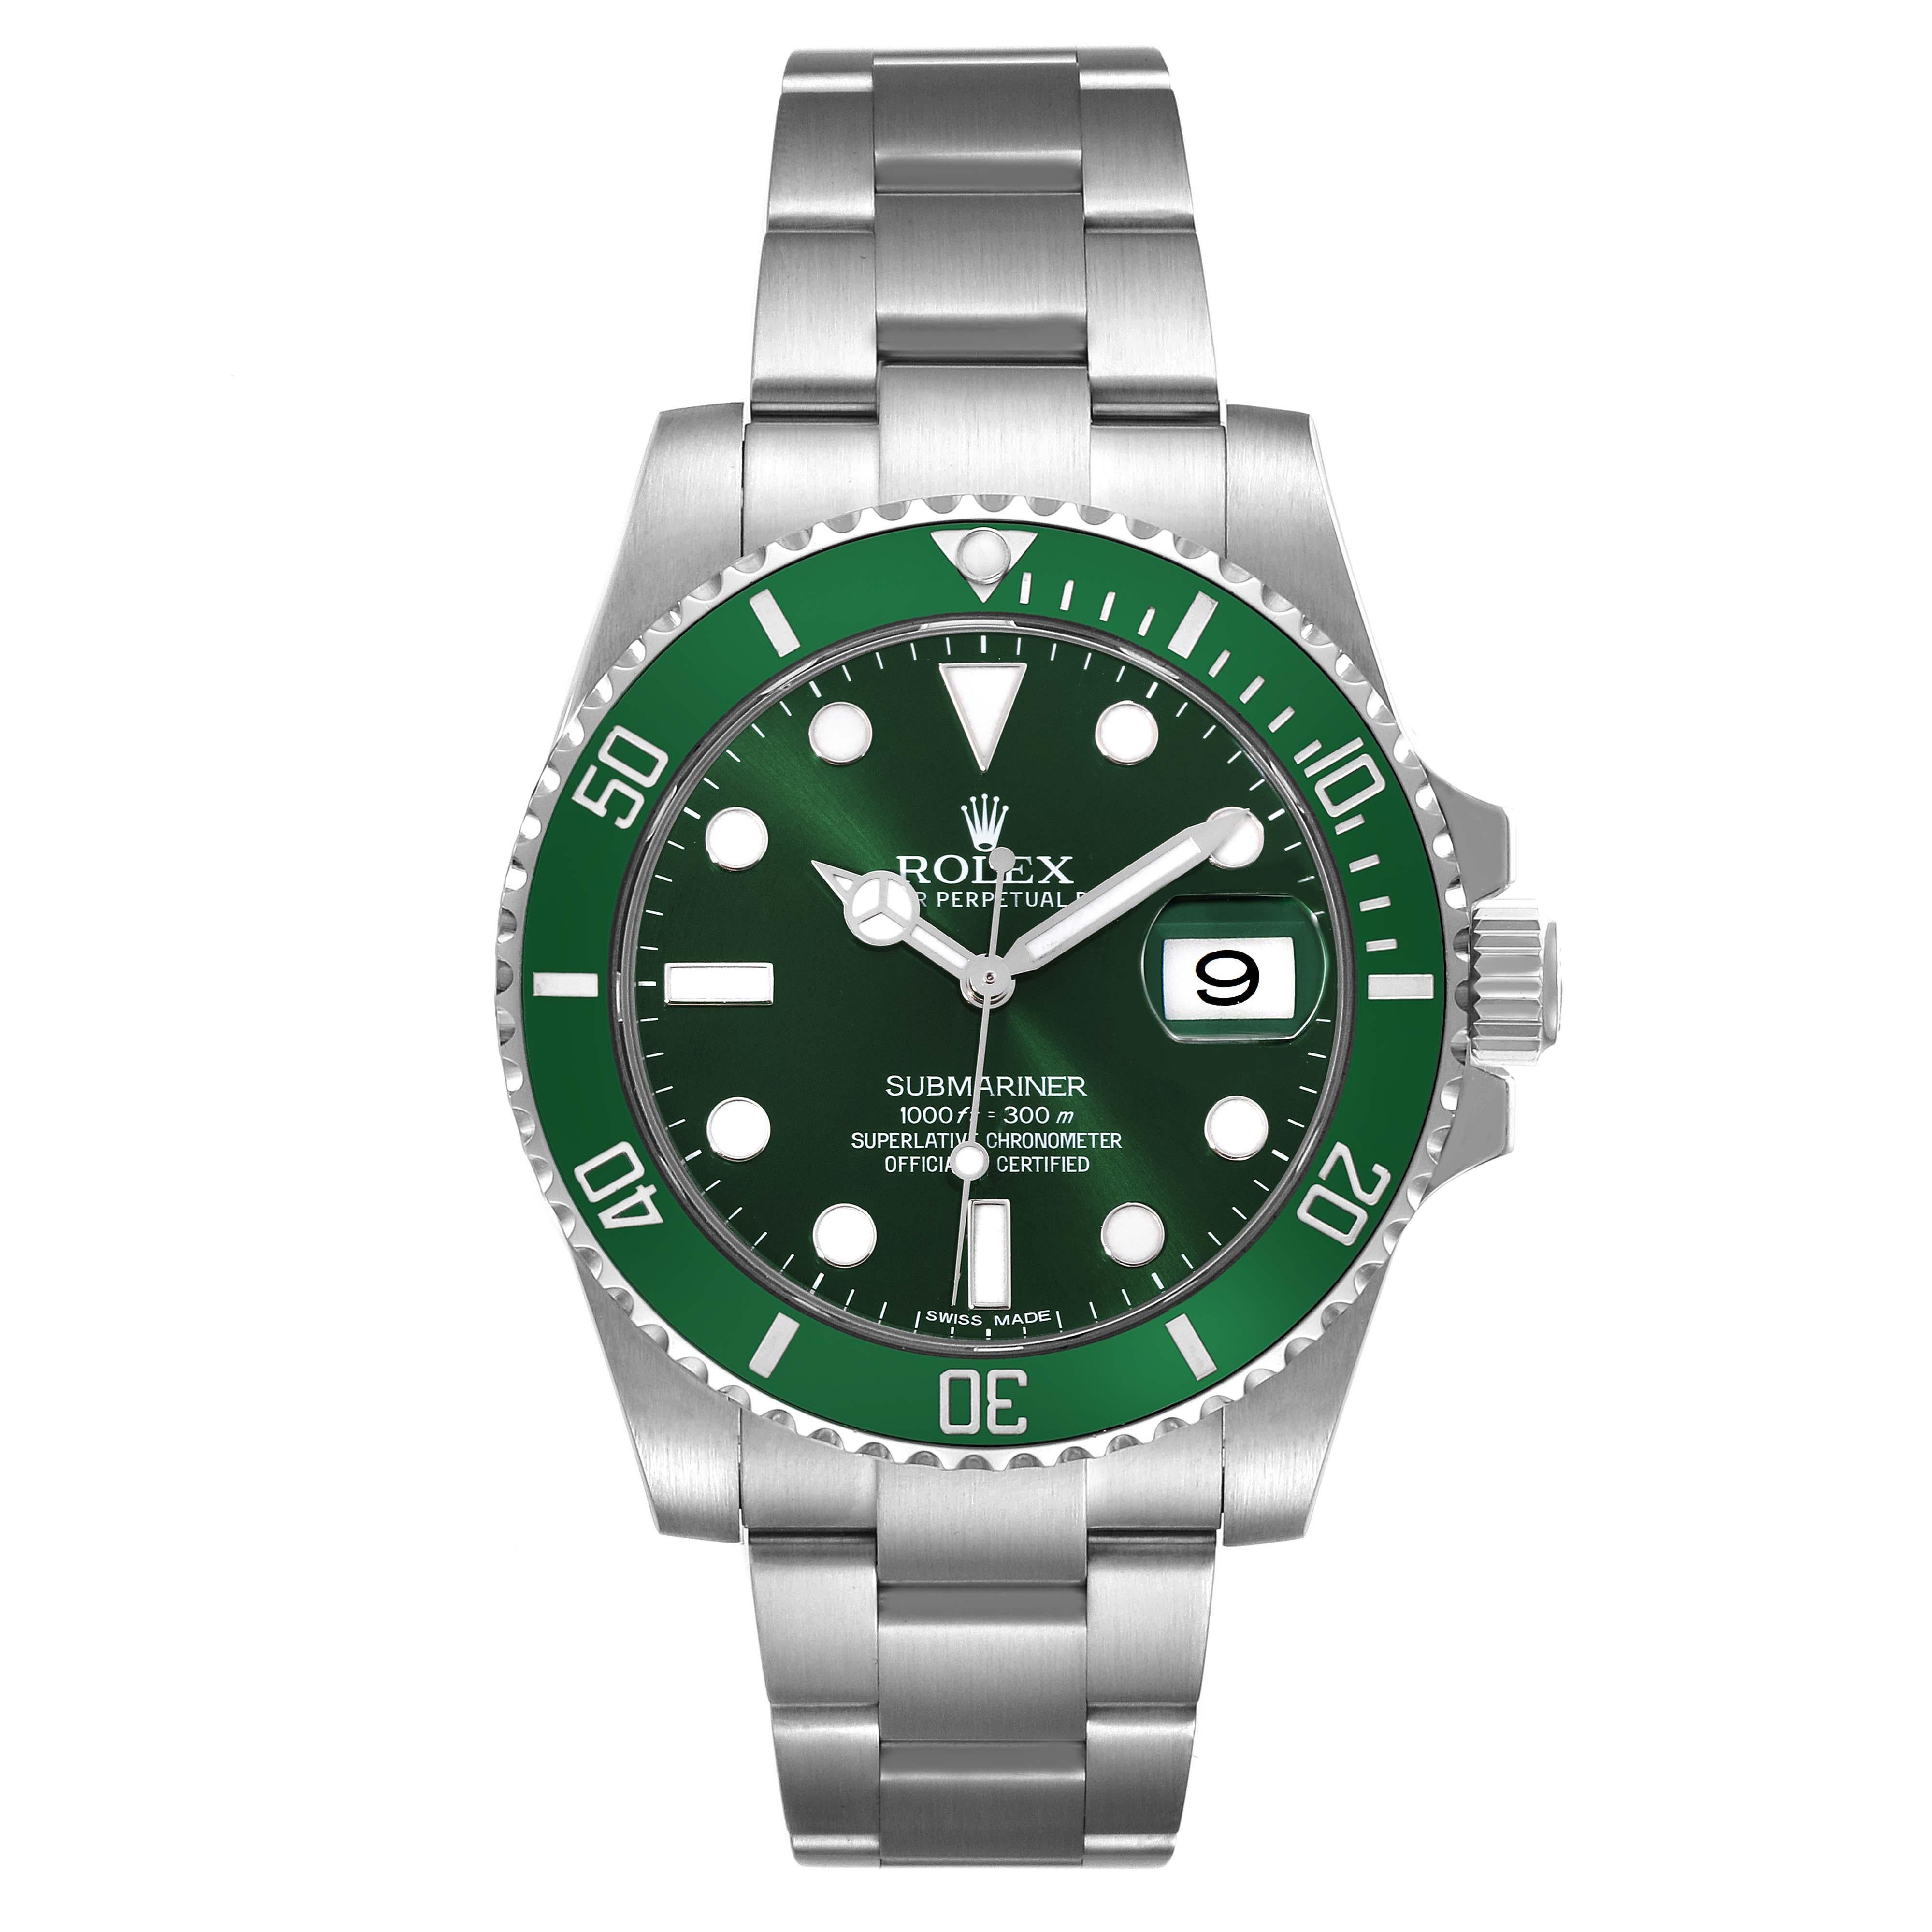 Rolex Submariner Hulk Green Dial Bezel Steel Mens Watch 116610LV Box Card. Officially certified chronometer automatic self-winding movement. Oyster case 40 mm in diameter. Rolex logo on the crown. Special time-lapse unidirectional rotating green